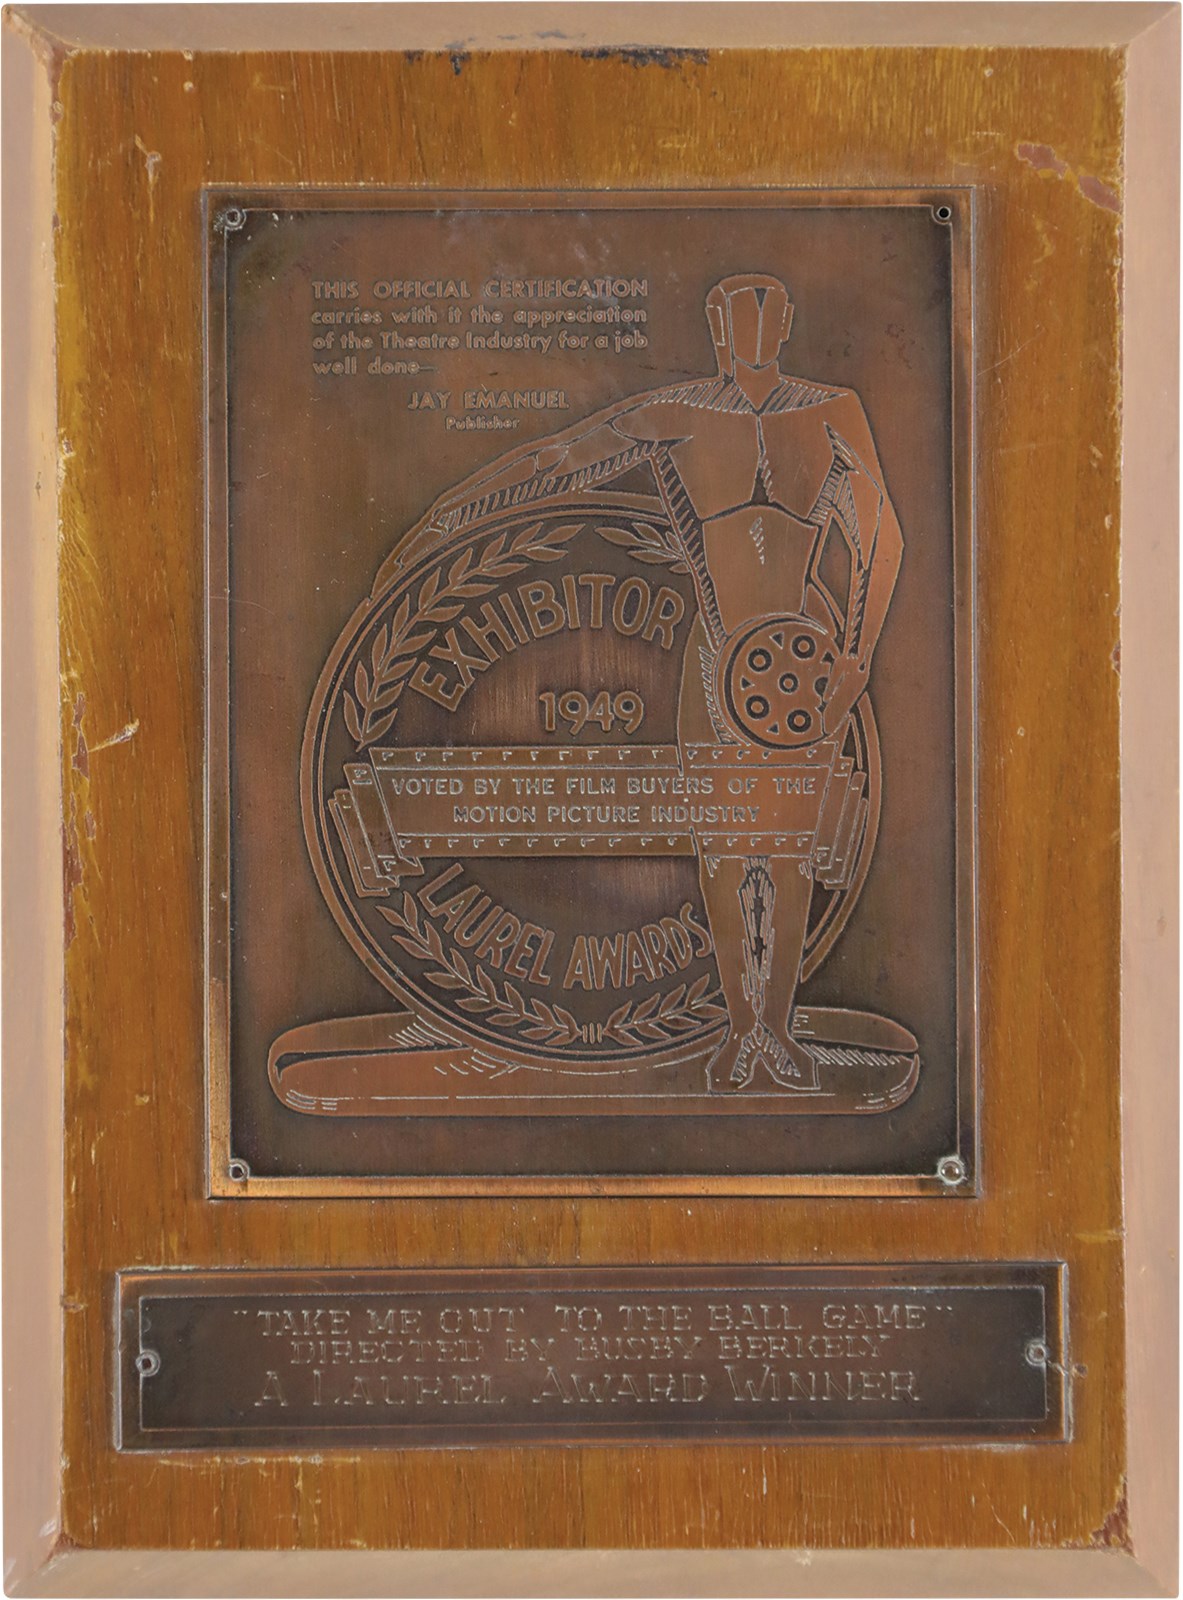 1949 Laurel Award Winner "Take Me Out to the Ball Game" Plaque